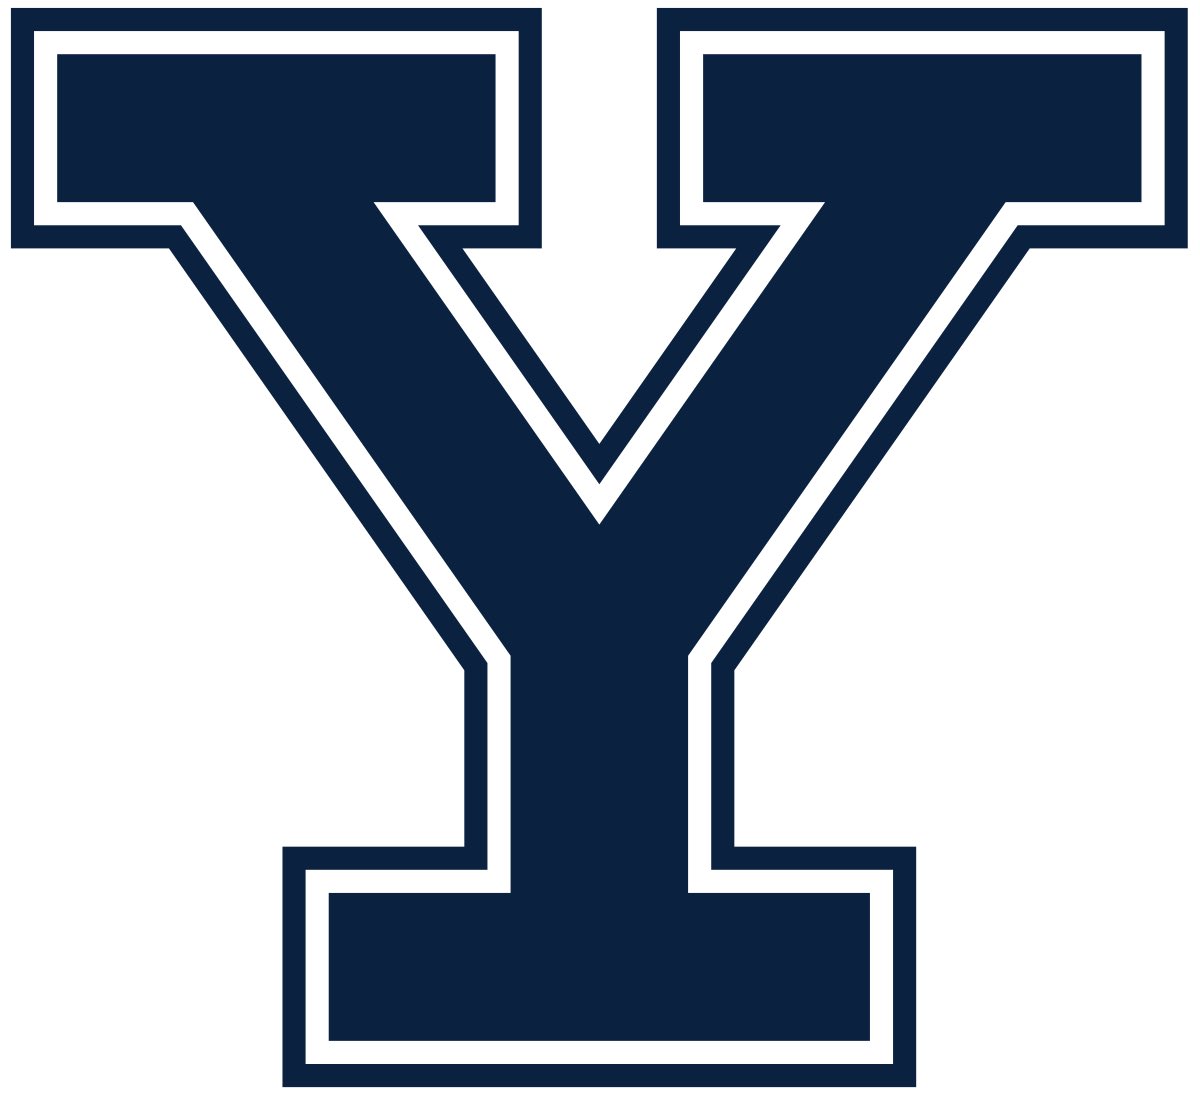 After a great showcase and a great talk with @ChrisBergeski I am excited to announce that I have received my 10th Division 1 offer to Yale University! @CoachDitmore @VaughanCoach @WClay99 @hzfbfamily @JUSTCHILLY @BrandonHuffman @BlairAngulo @litten_andy @gavinlutman18